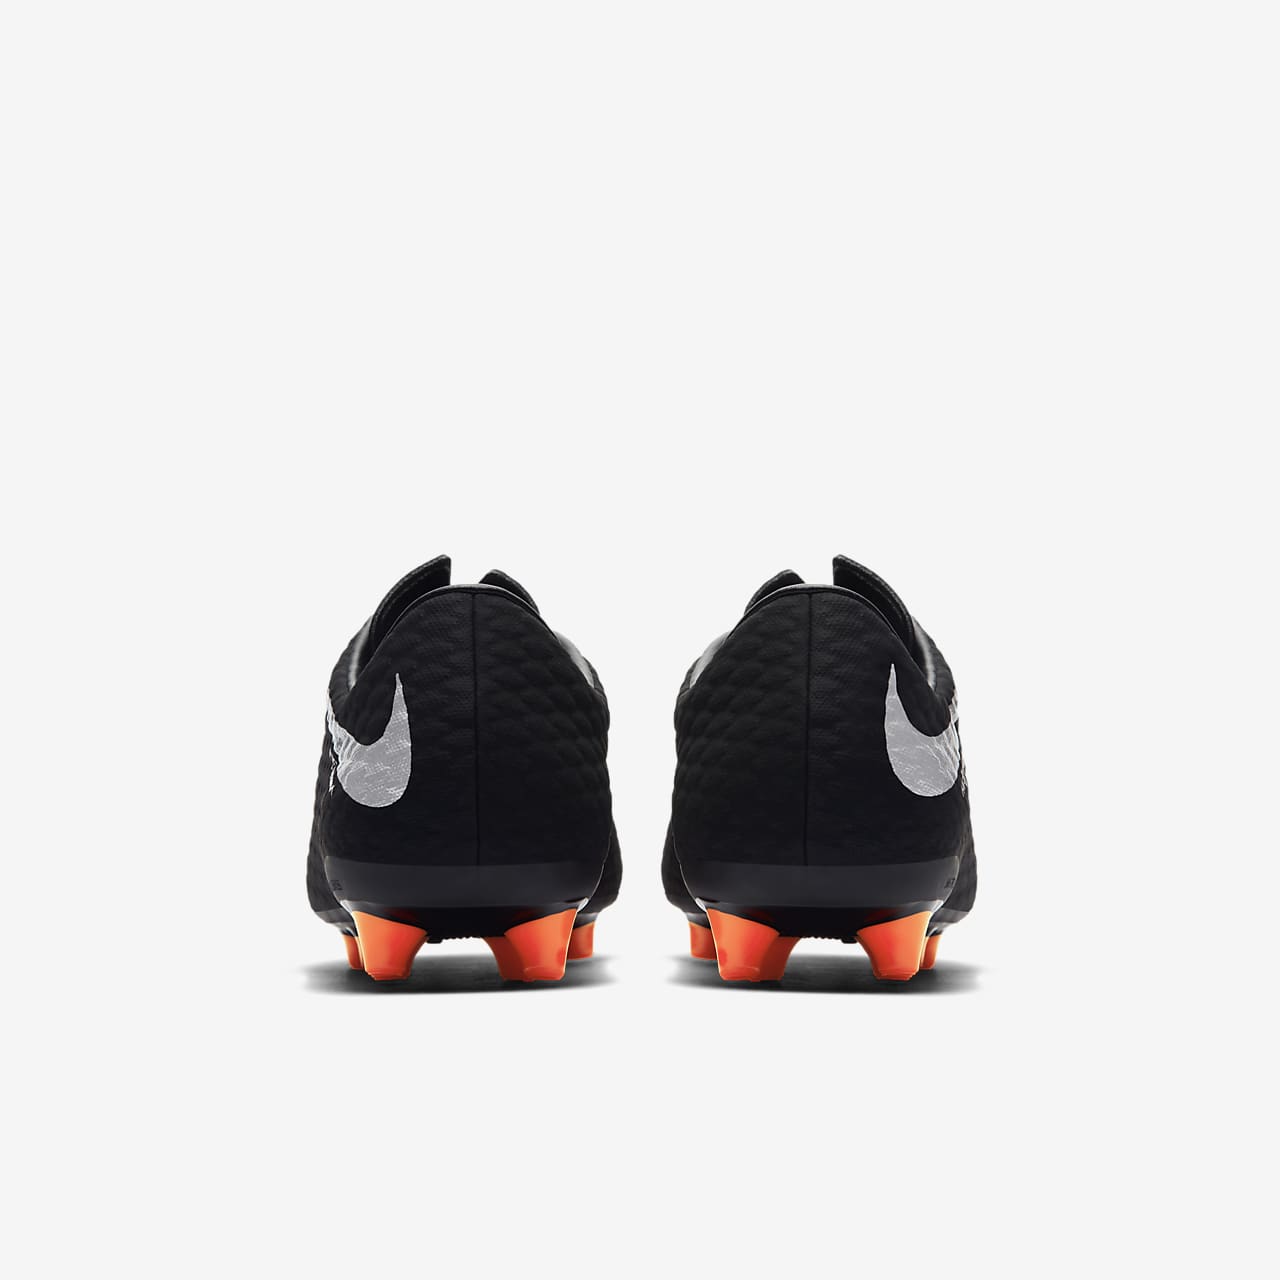 Nike Phelon 3 AG-PRO Artificial-Grass Football Boot. Nike IN